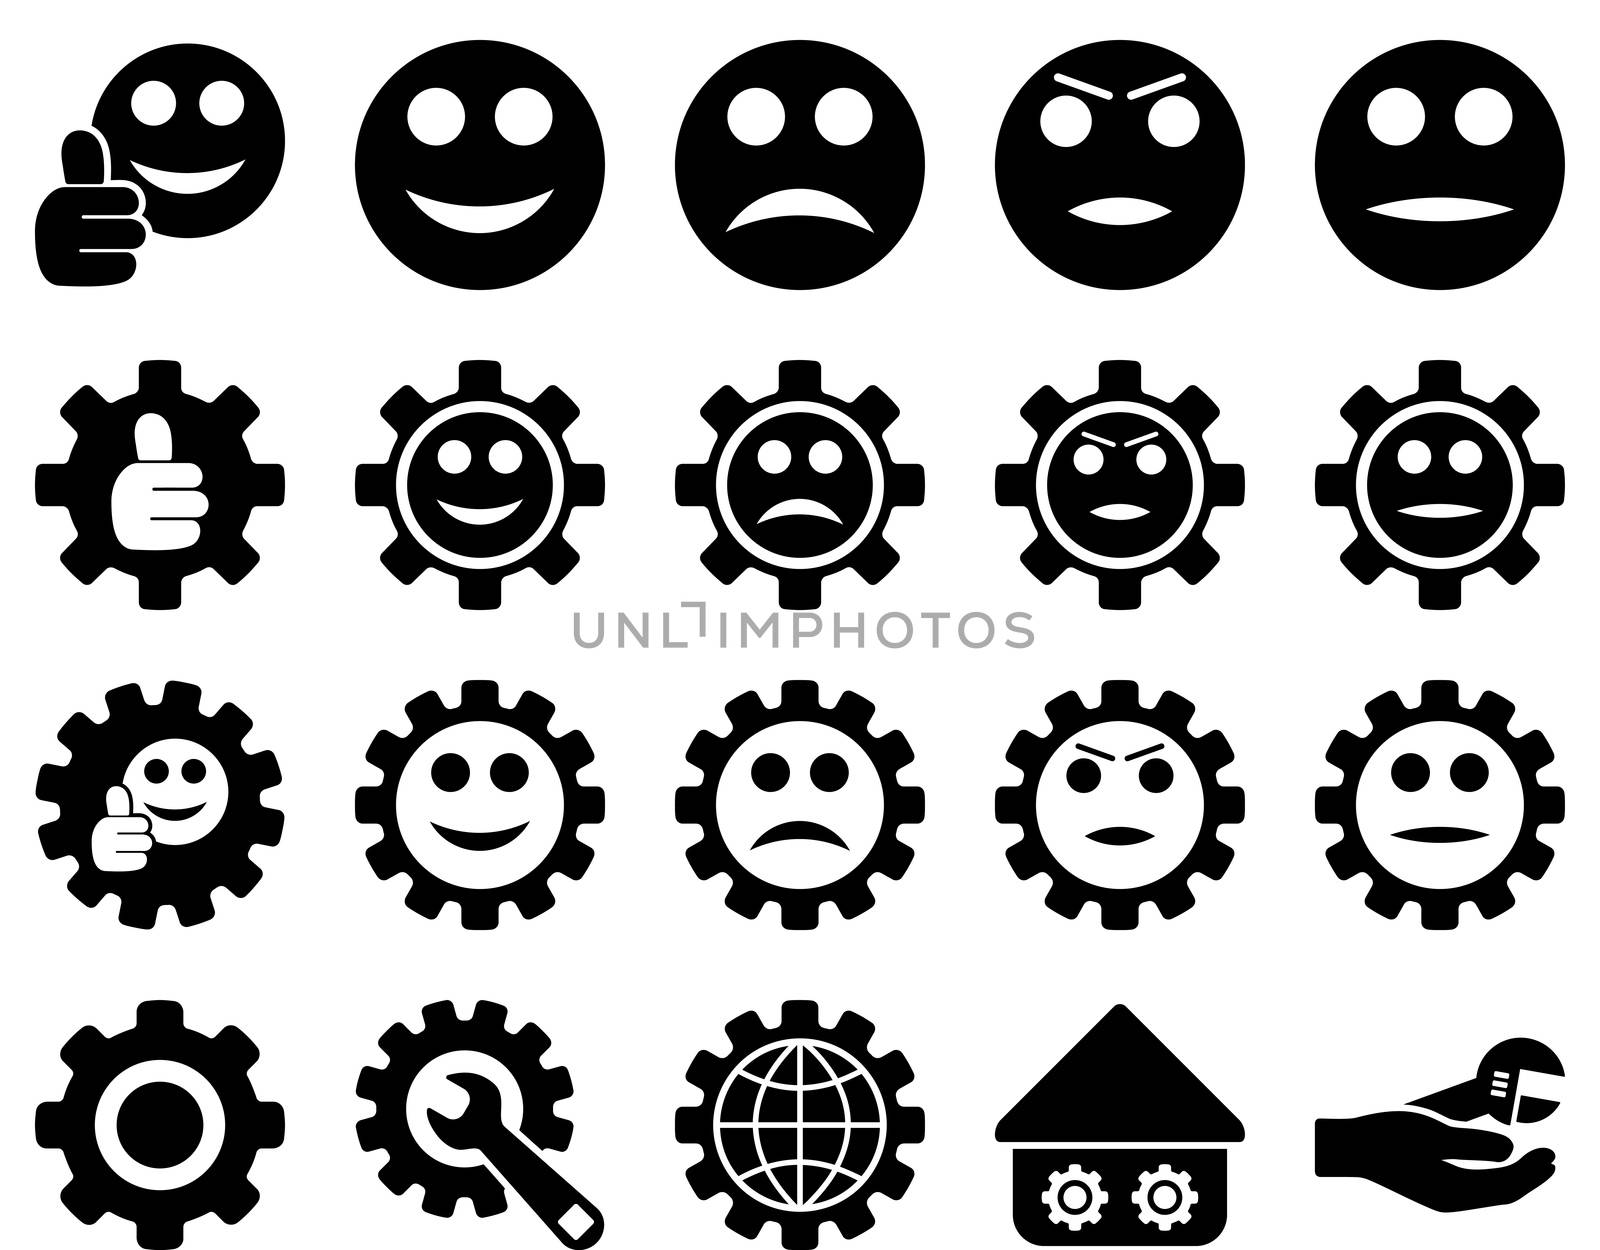 Settings and Smile Gears Icons. Glyph set style is flat images, black color, isolated on a white background.